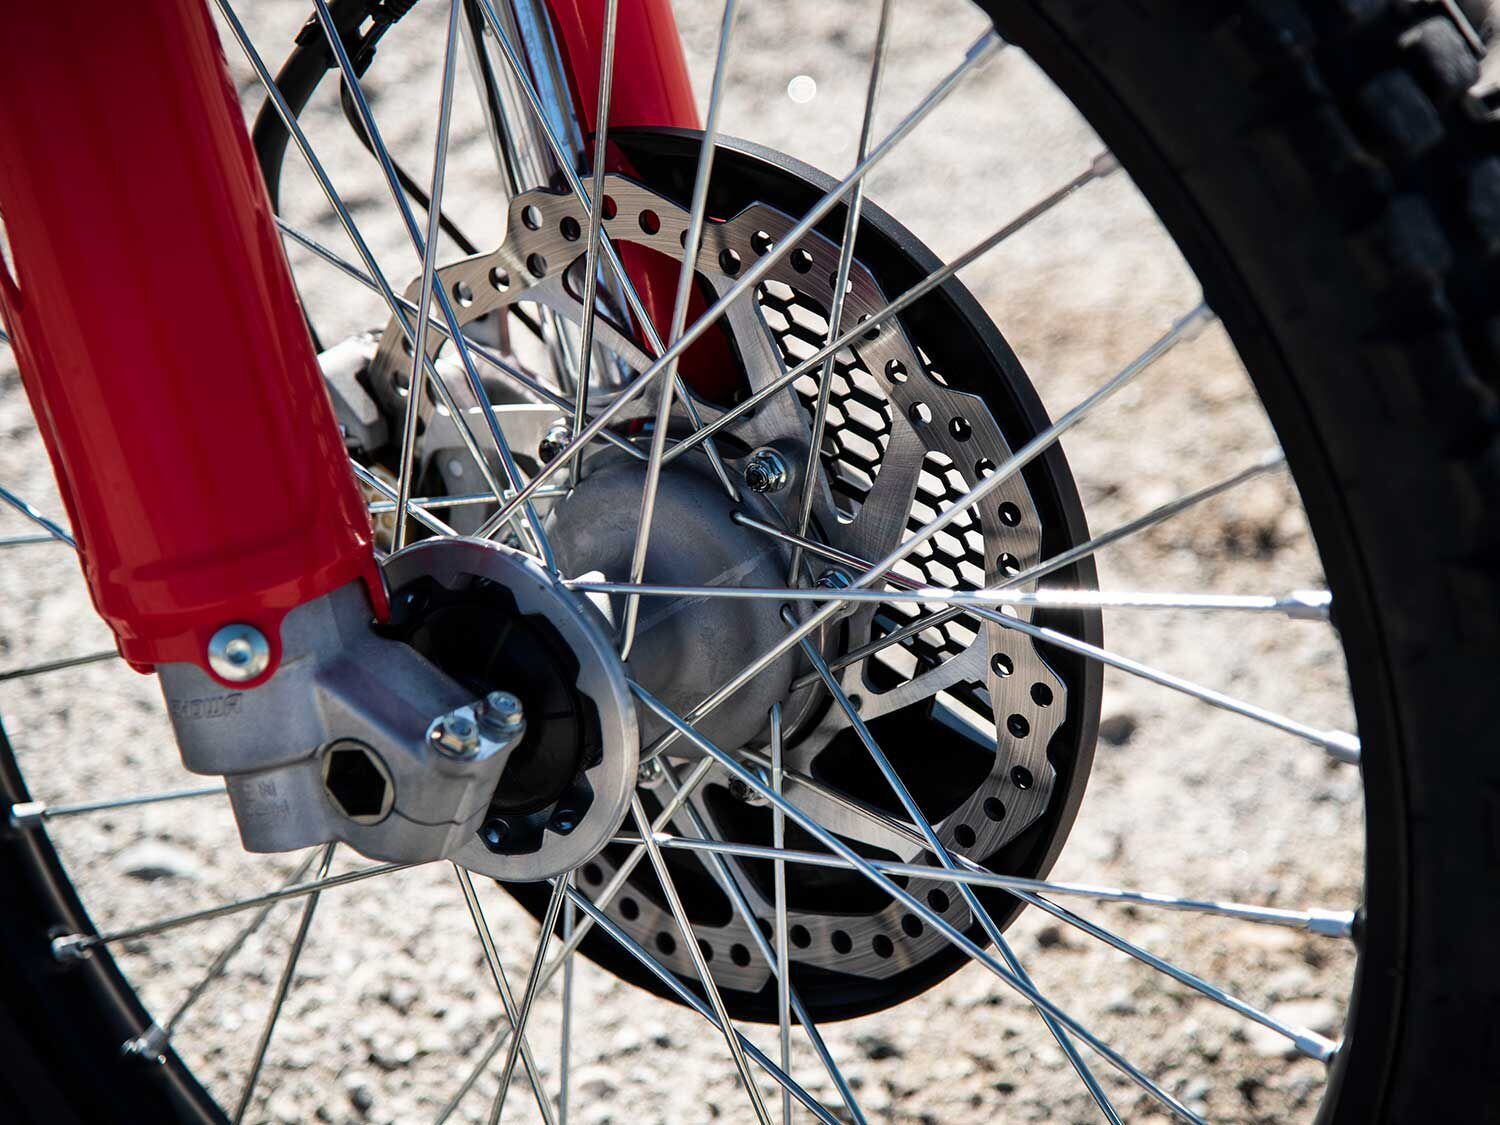 The L variant gets slightly thicker brake rotors and a larger fluid reservoir for increased fade resistance.